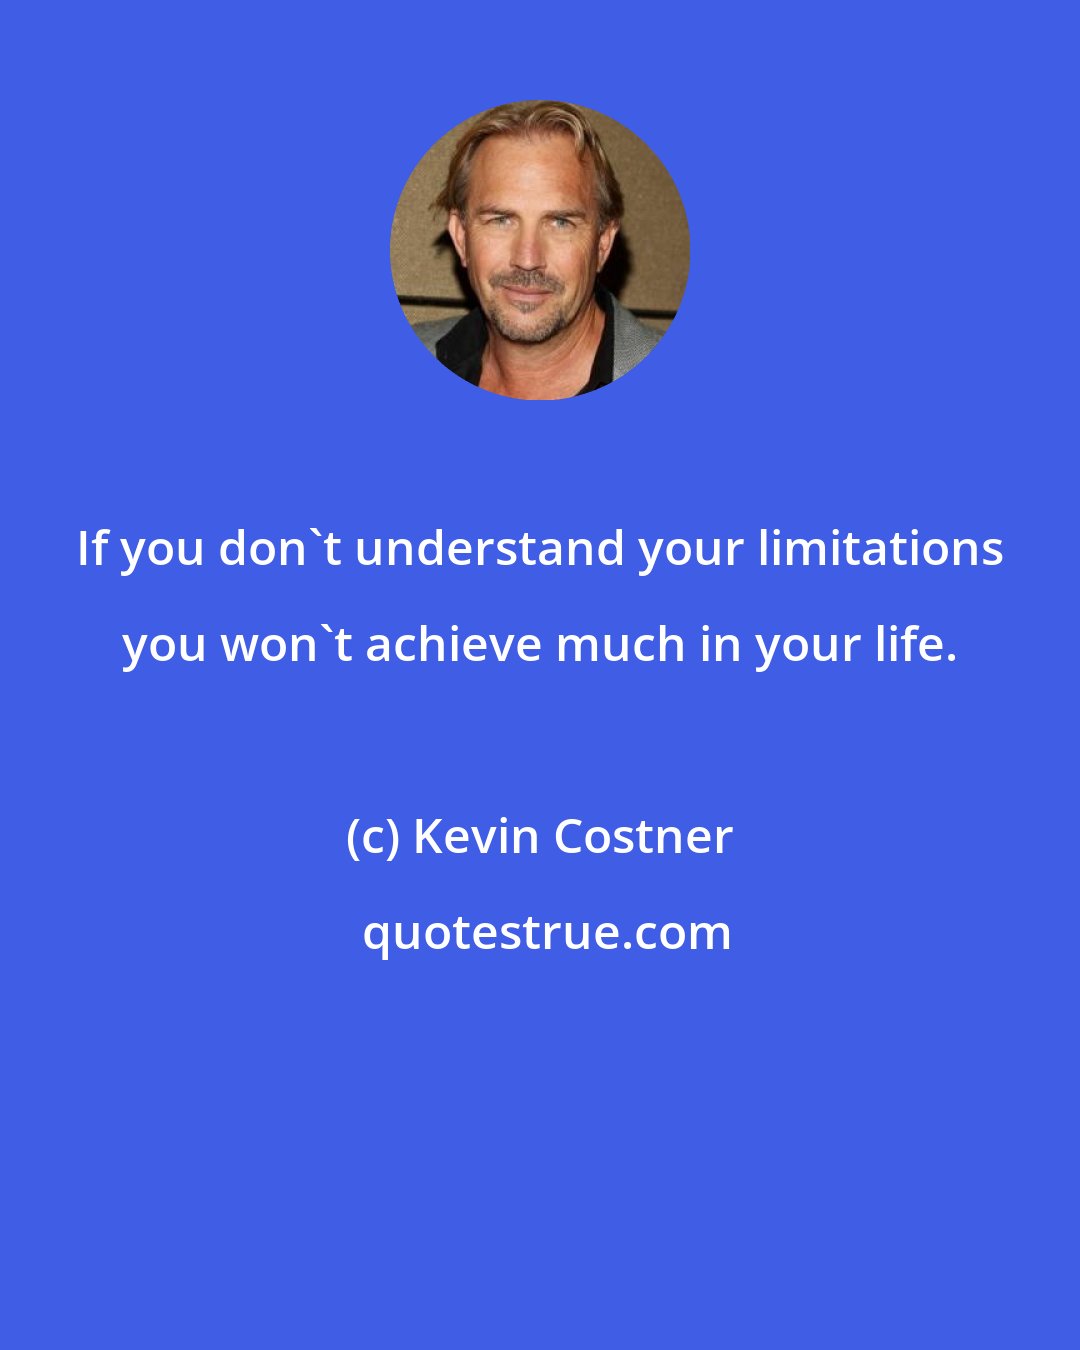 Kevin Costner: If you don't understand your limitations you won't achieve much in your life.